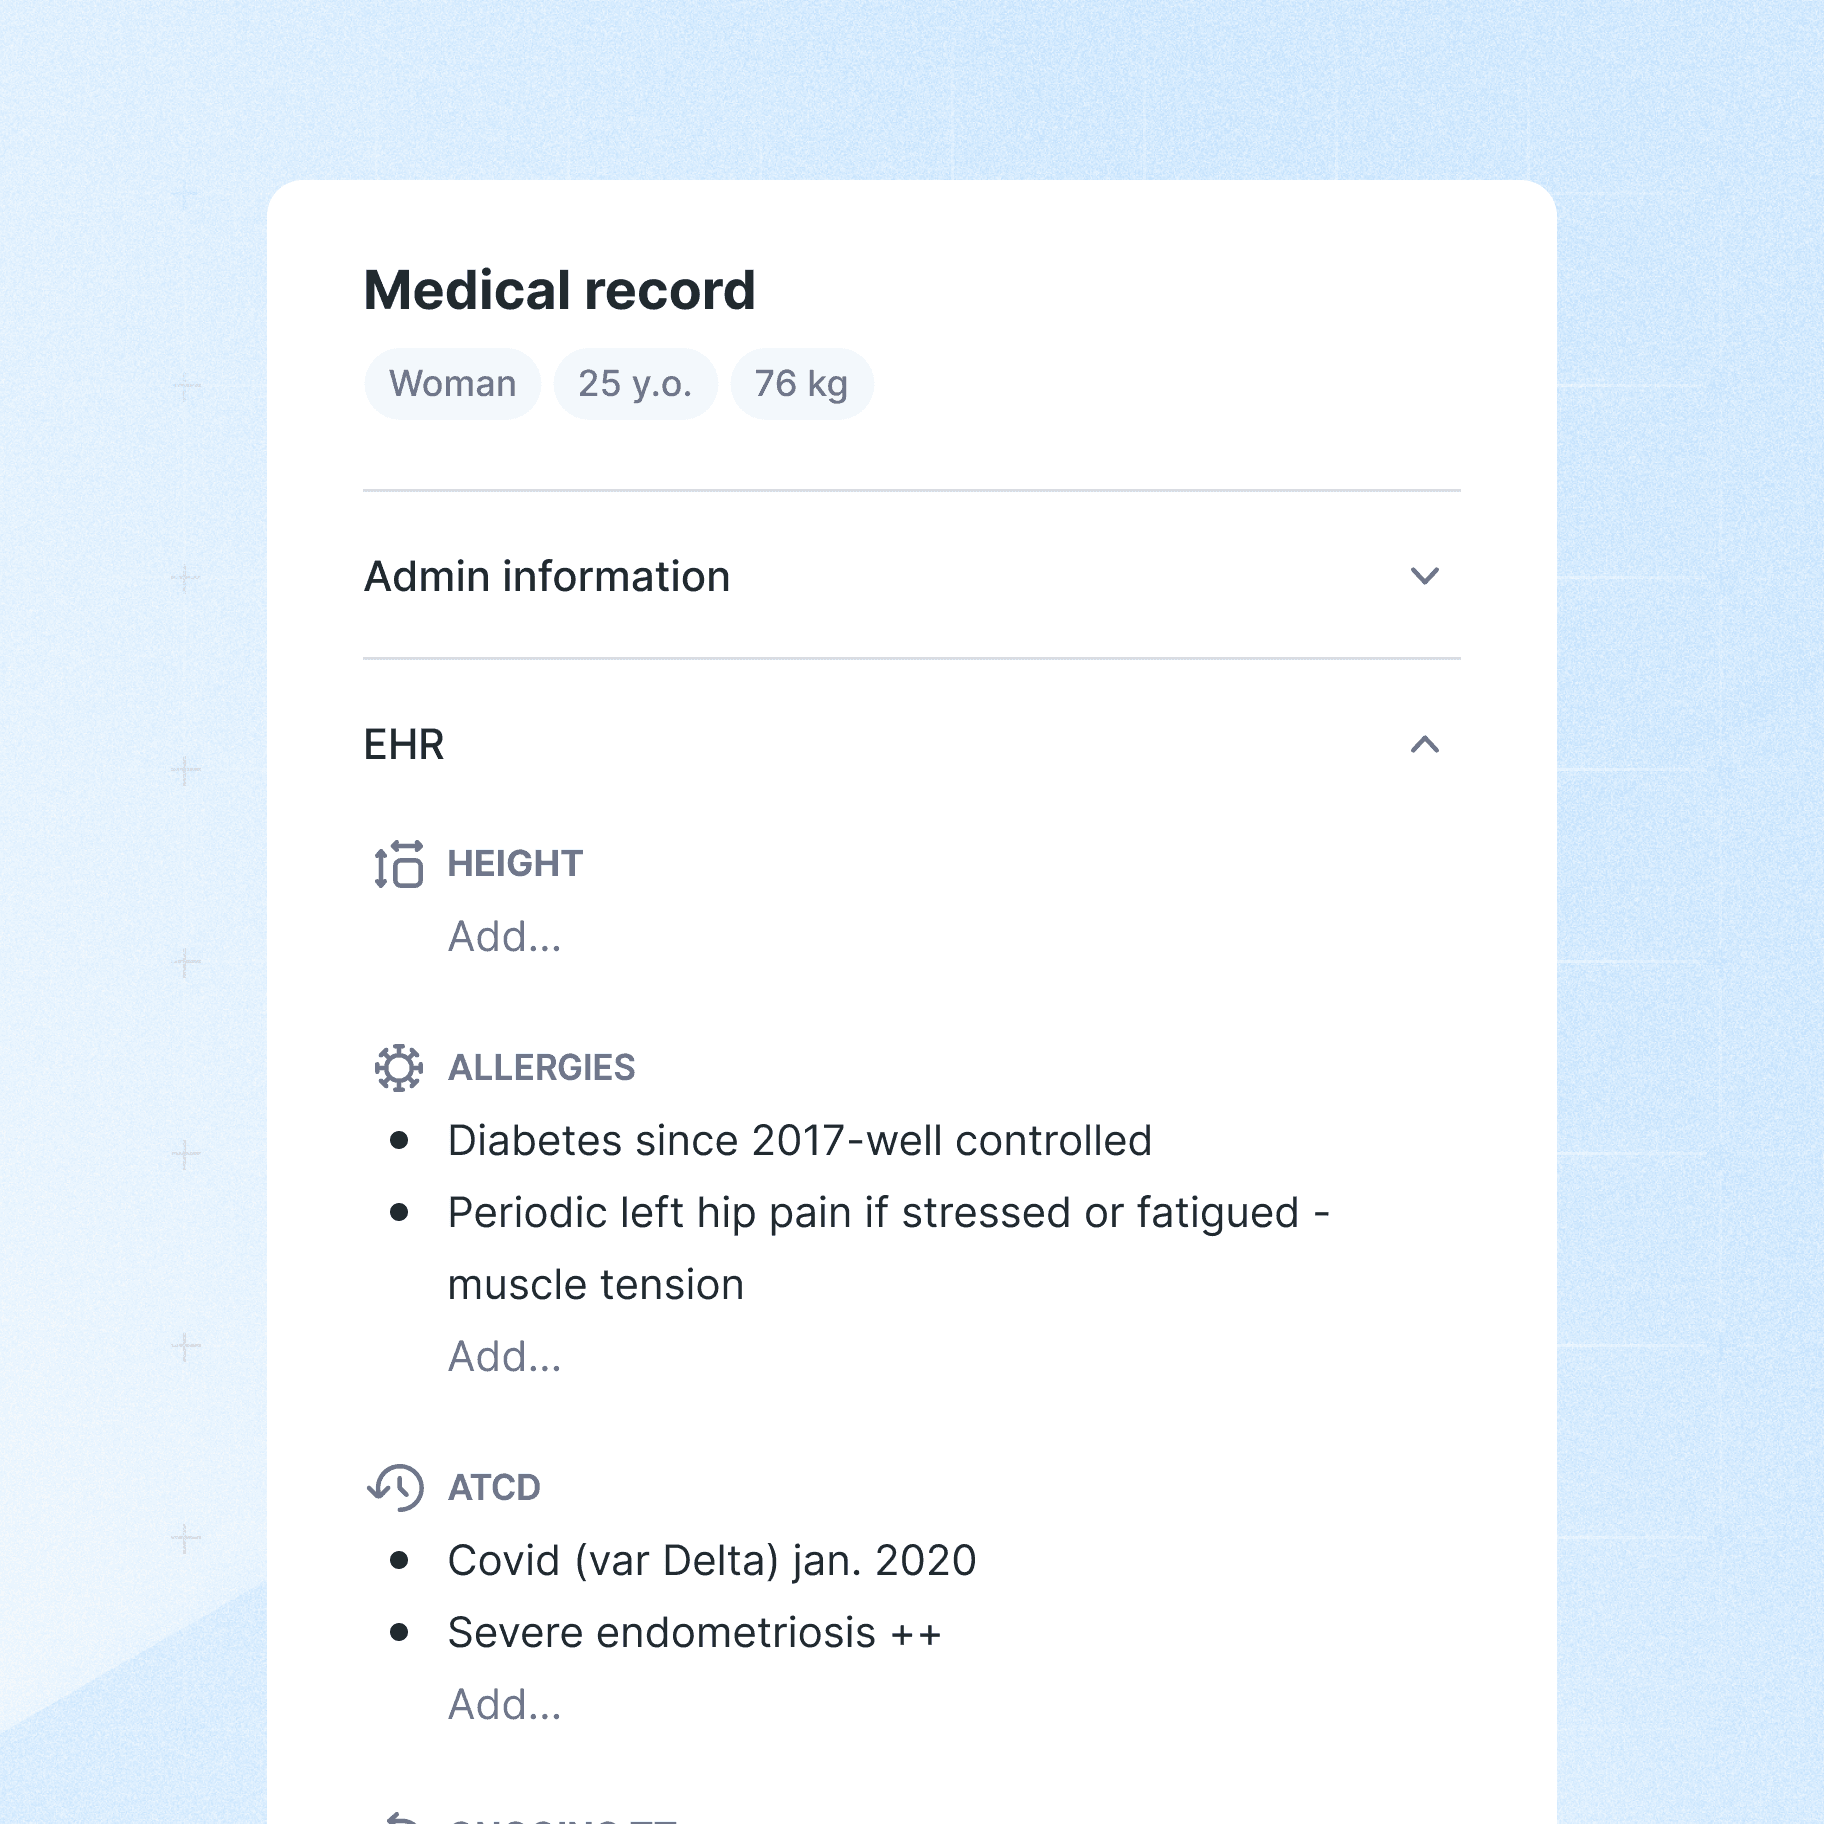 Update medical records from patient interactions